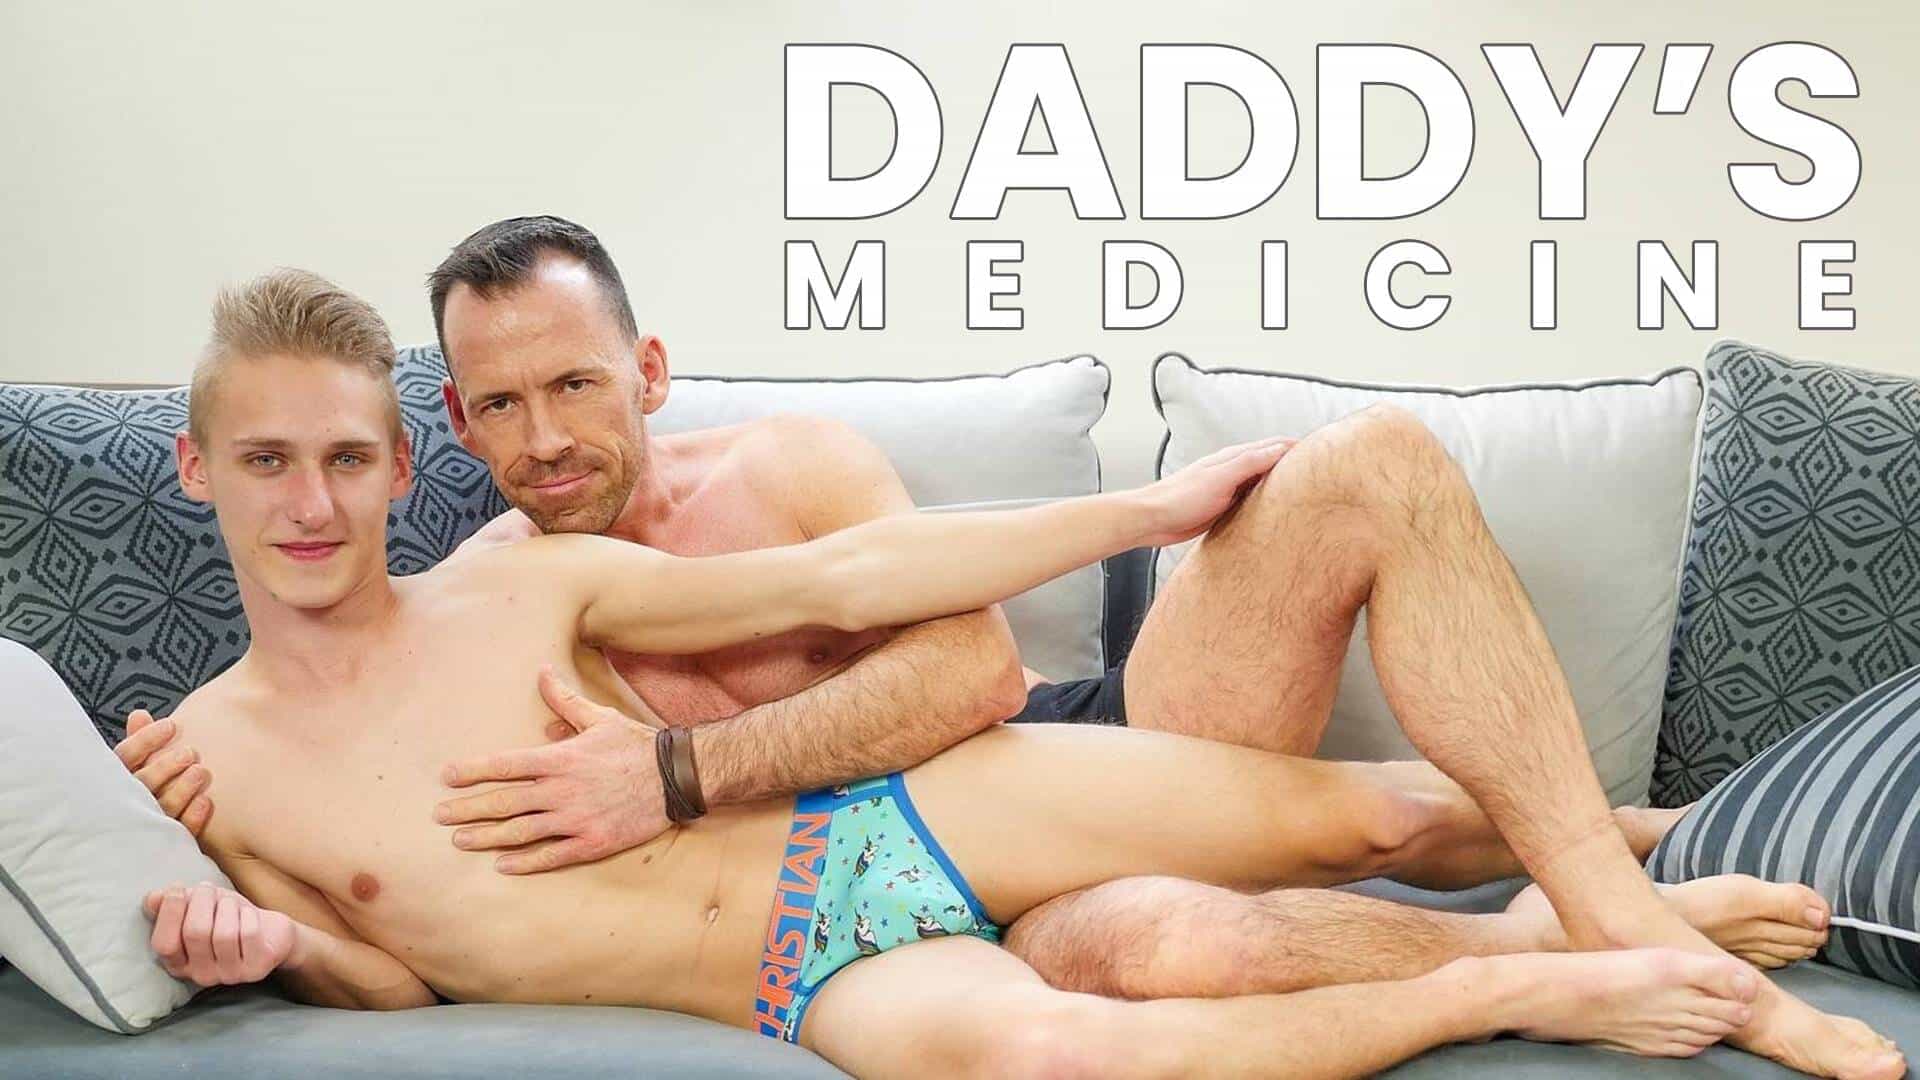 Daddy’s Medicine – Dave London and Oliver Morgenson 2